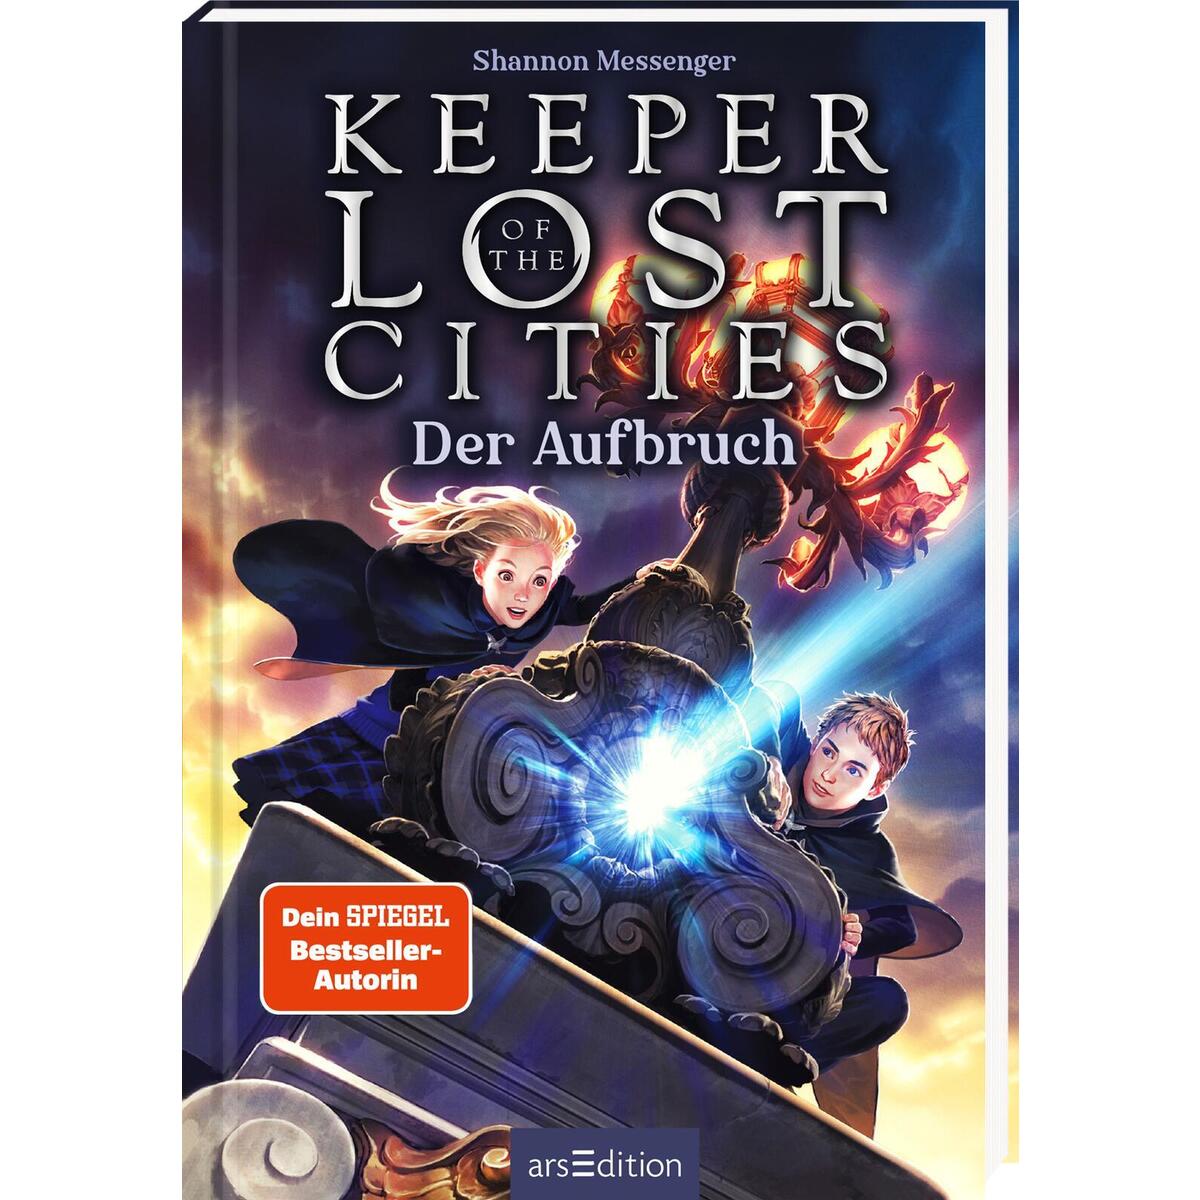 Keeper of the Lost Cities - Der Aufbruch (Keeper of the Lost Cities 1) von Ars Edition GmbH